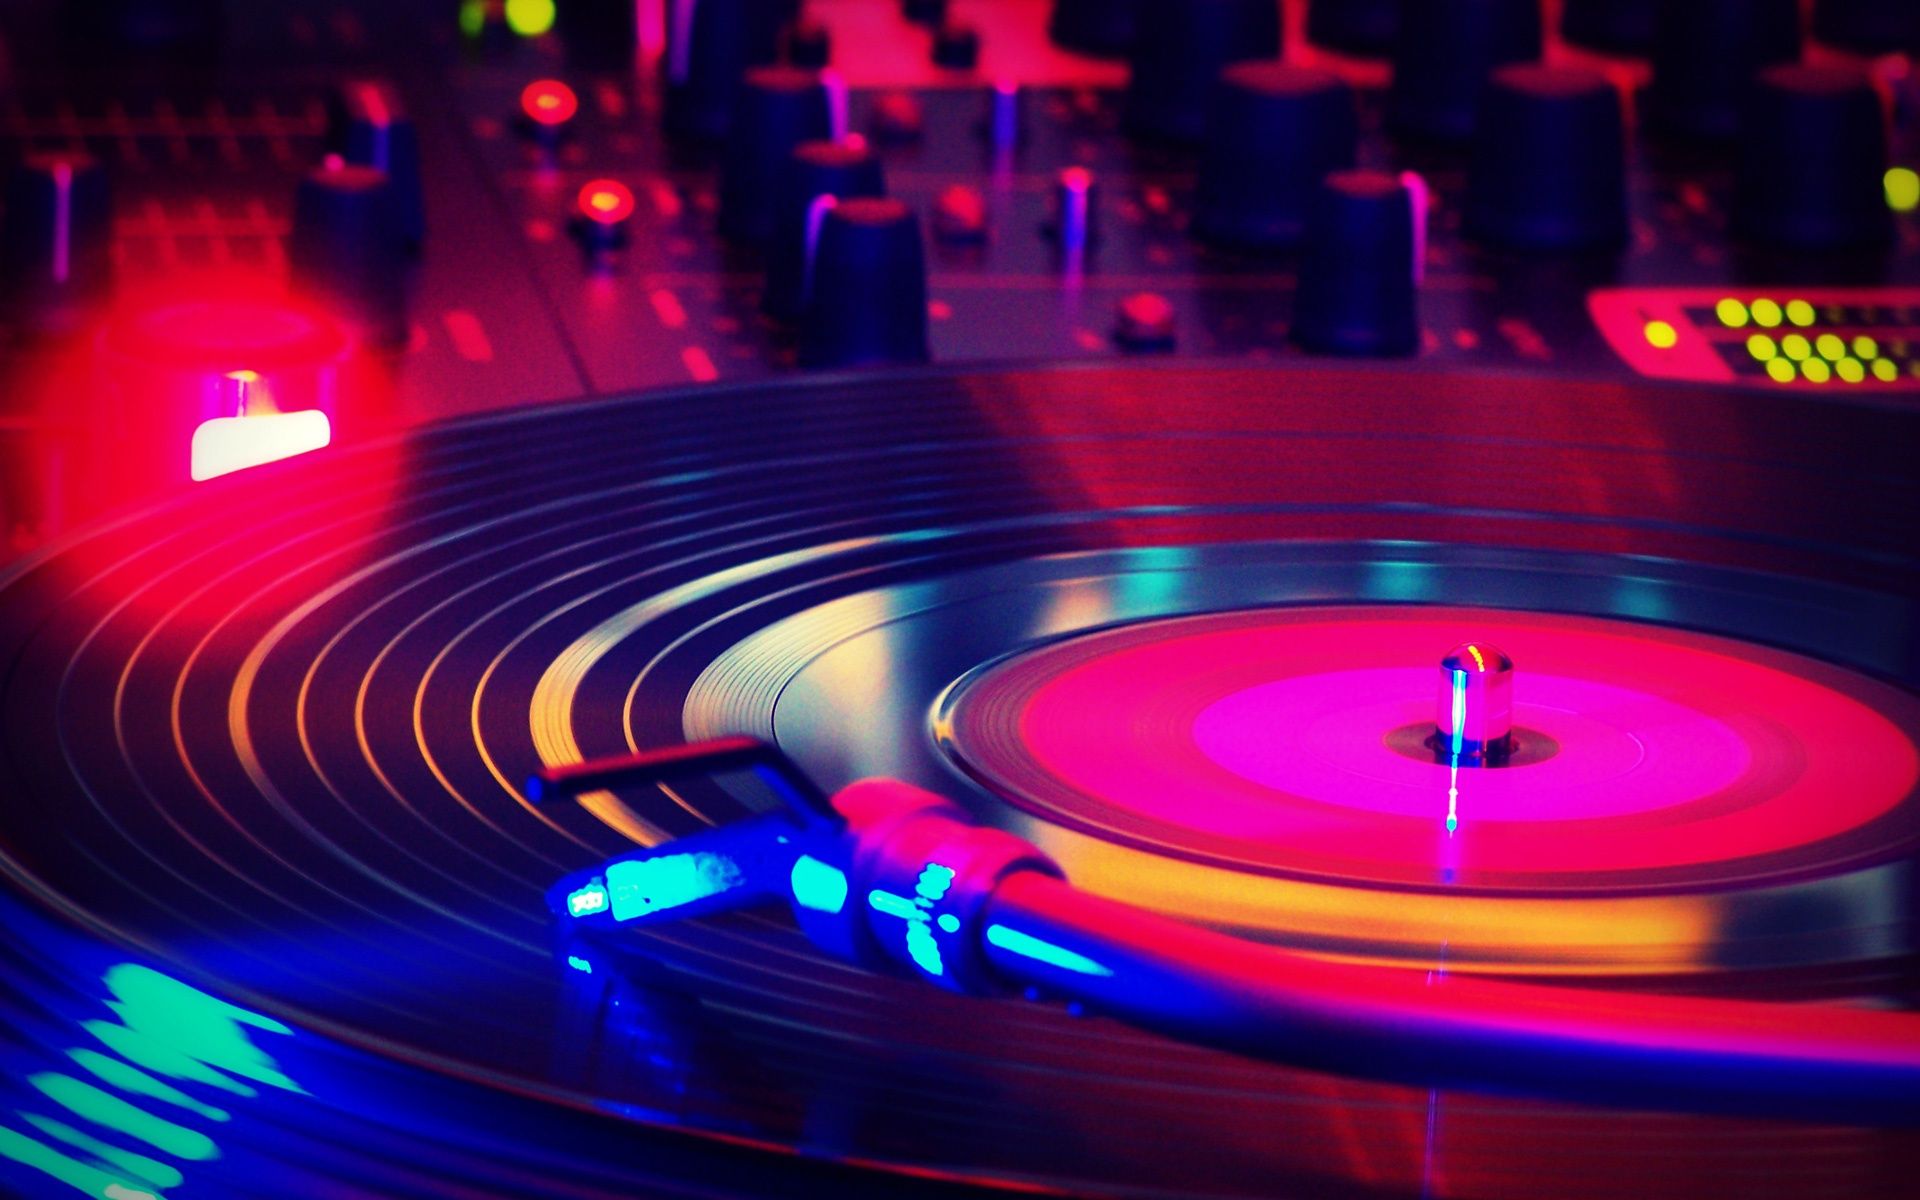 Turntables Wallpaper Turntable Record Spinning Fast On Music